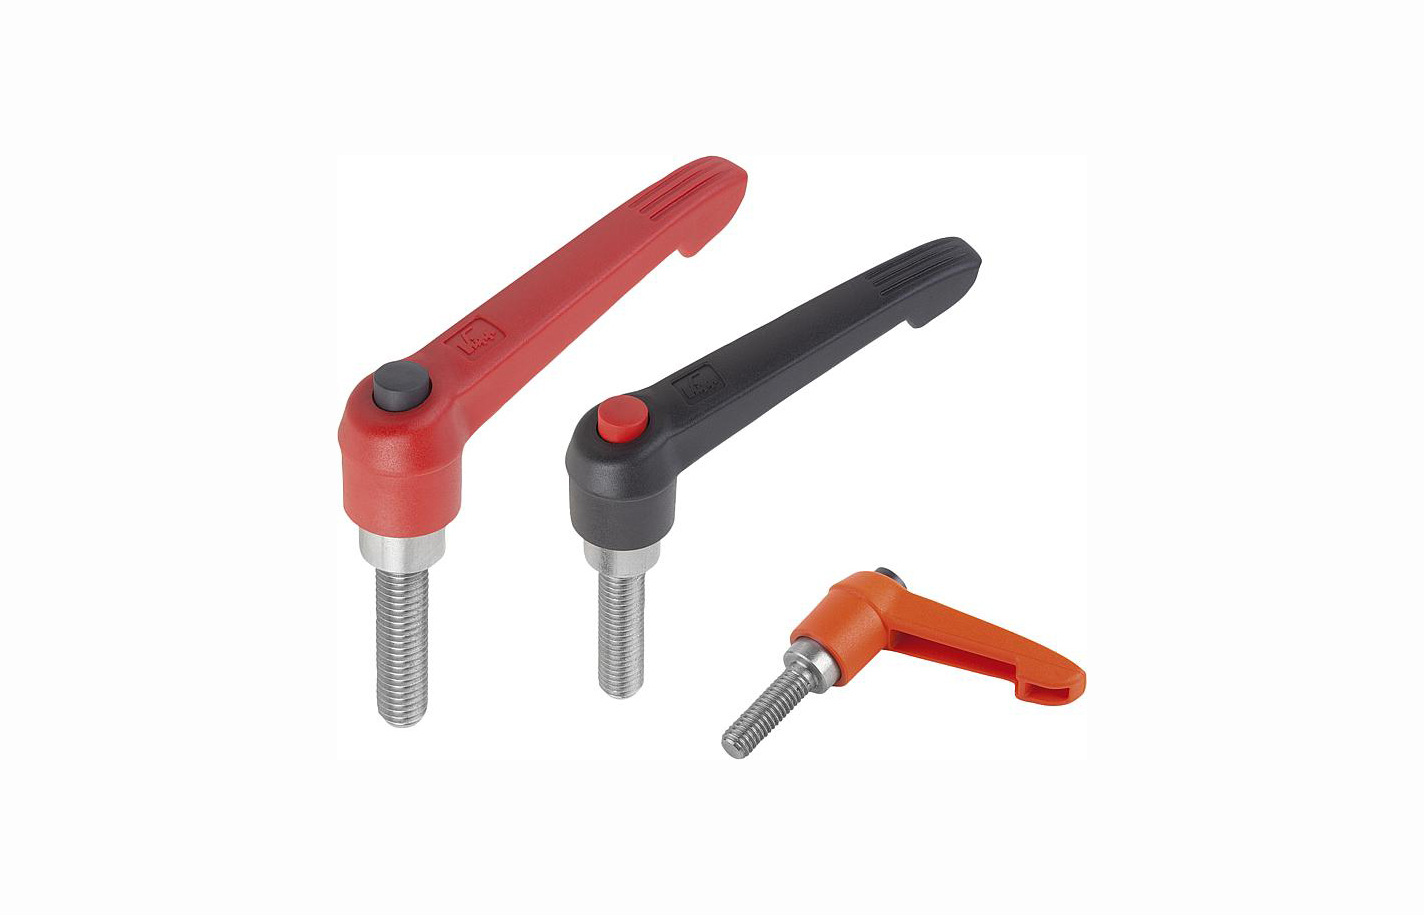 K0270 Clamping levers with push button, external thread, metal parts stainless steel